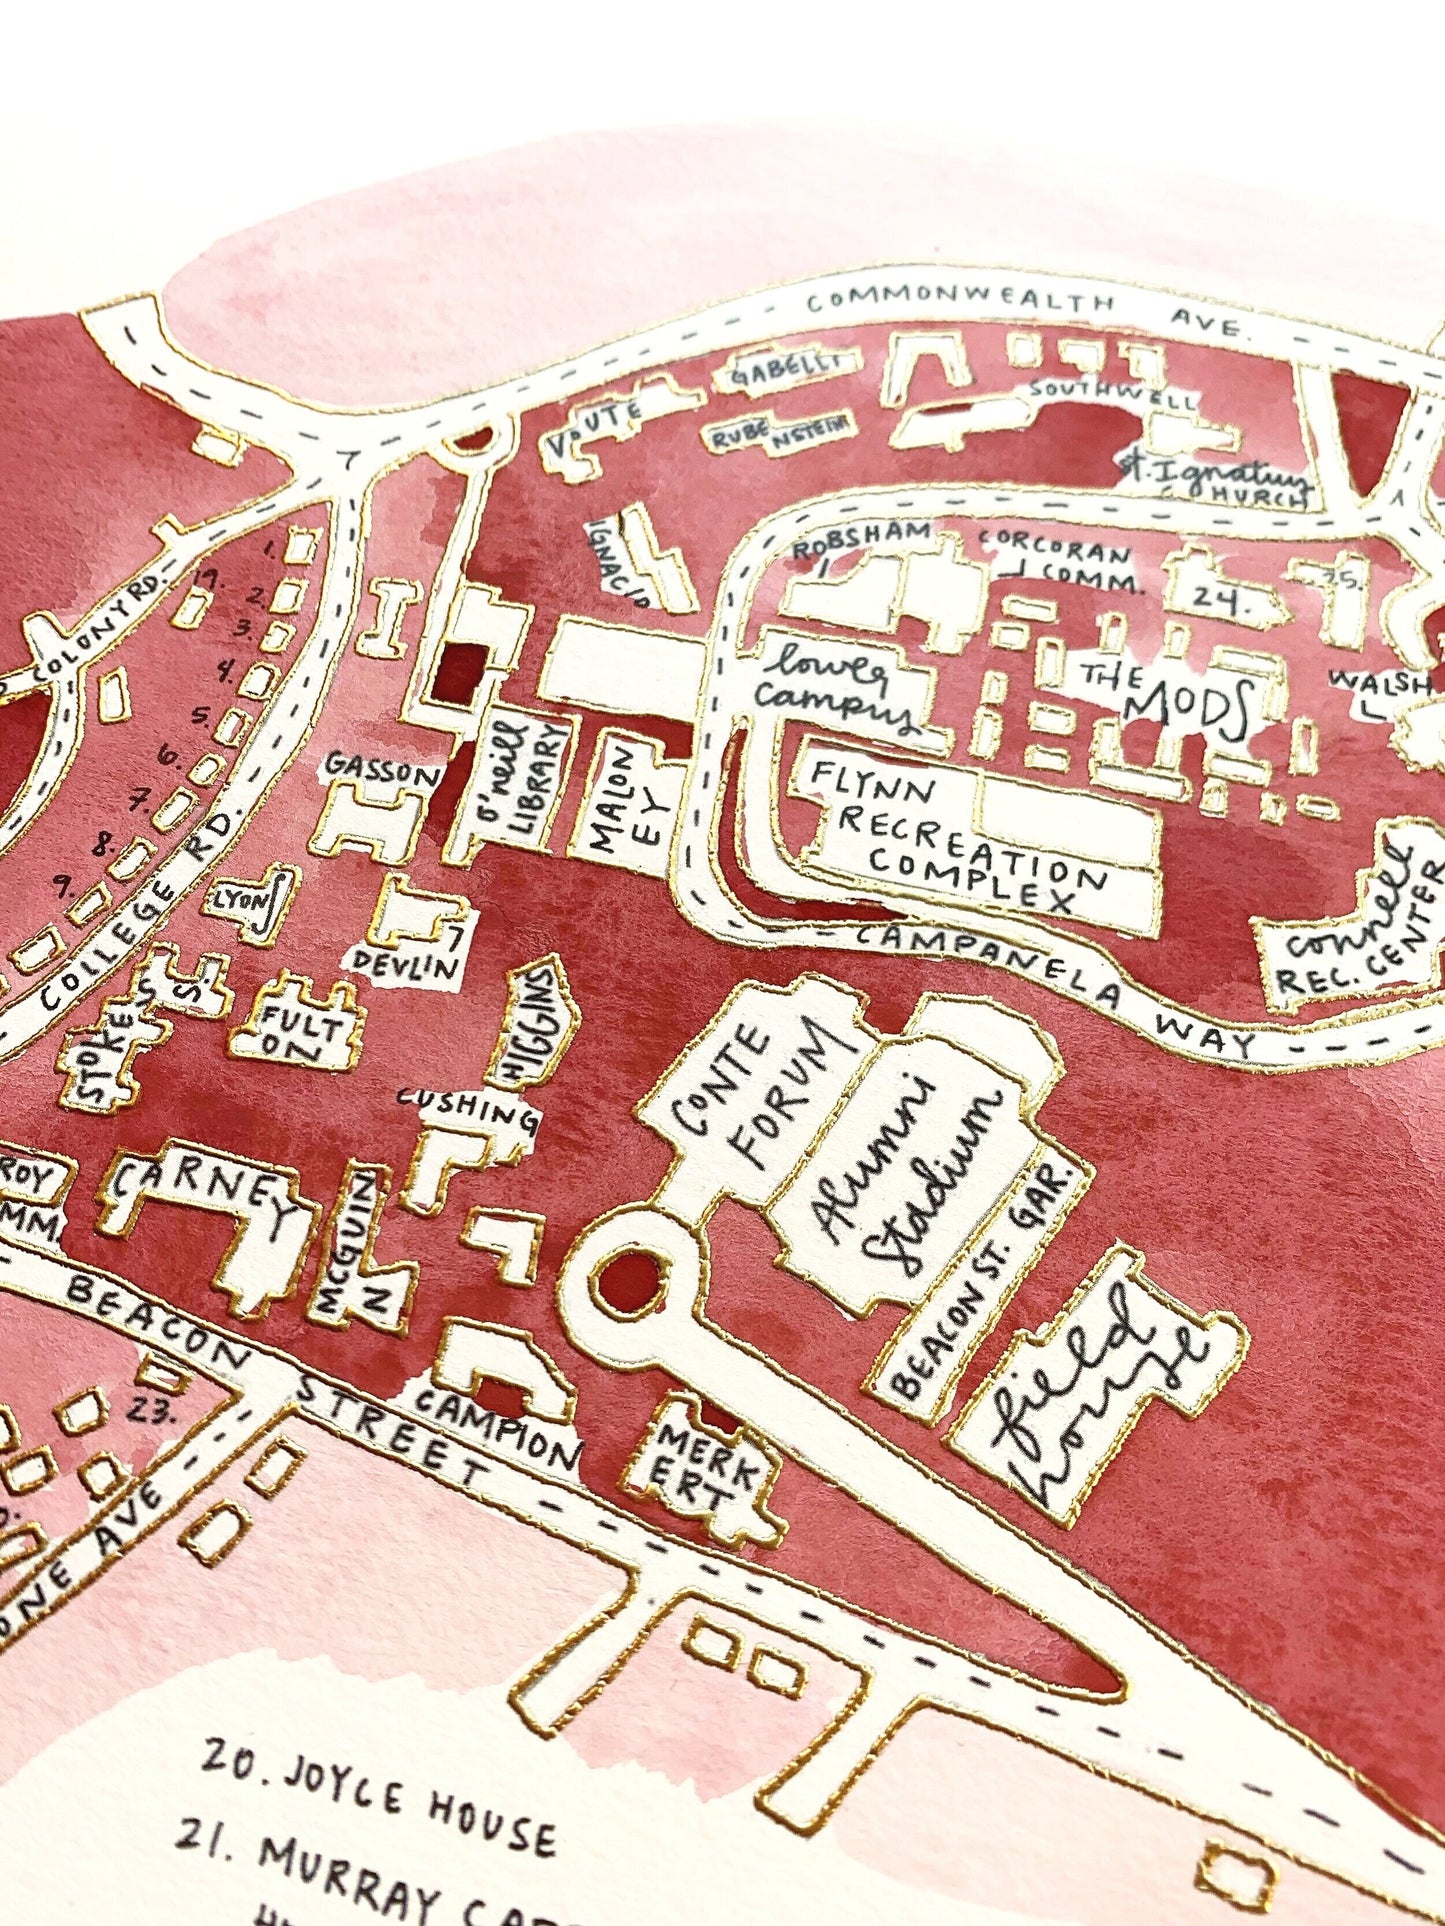 Hand Painted Boston College Campus Map